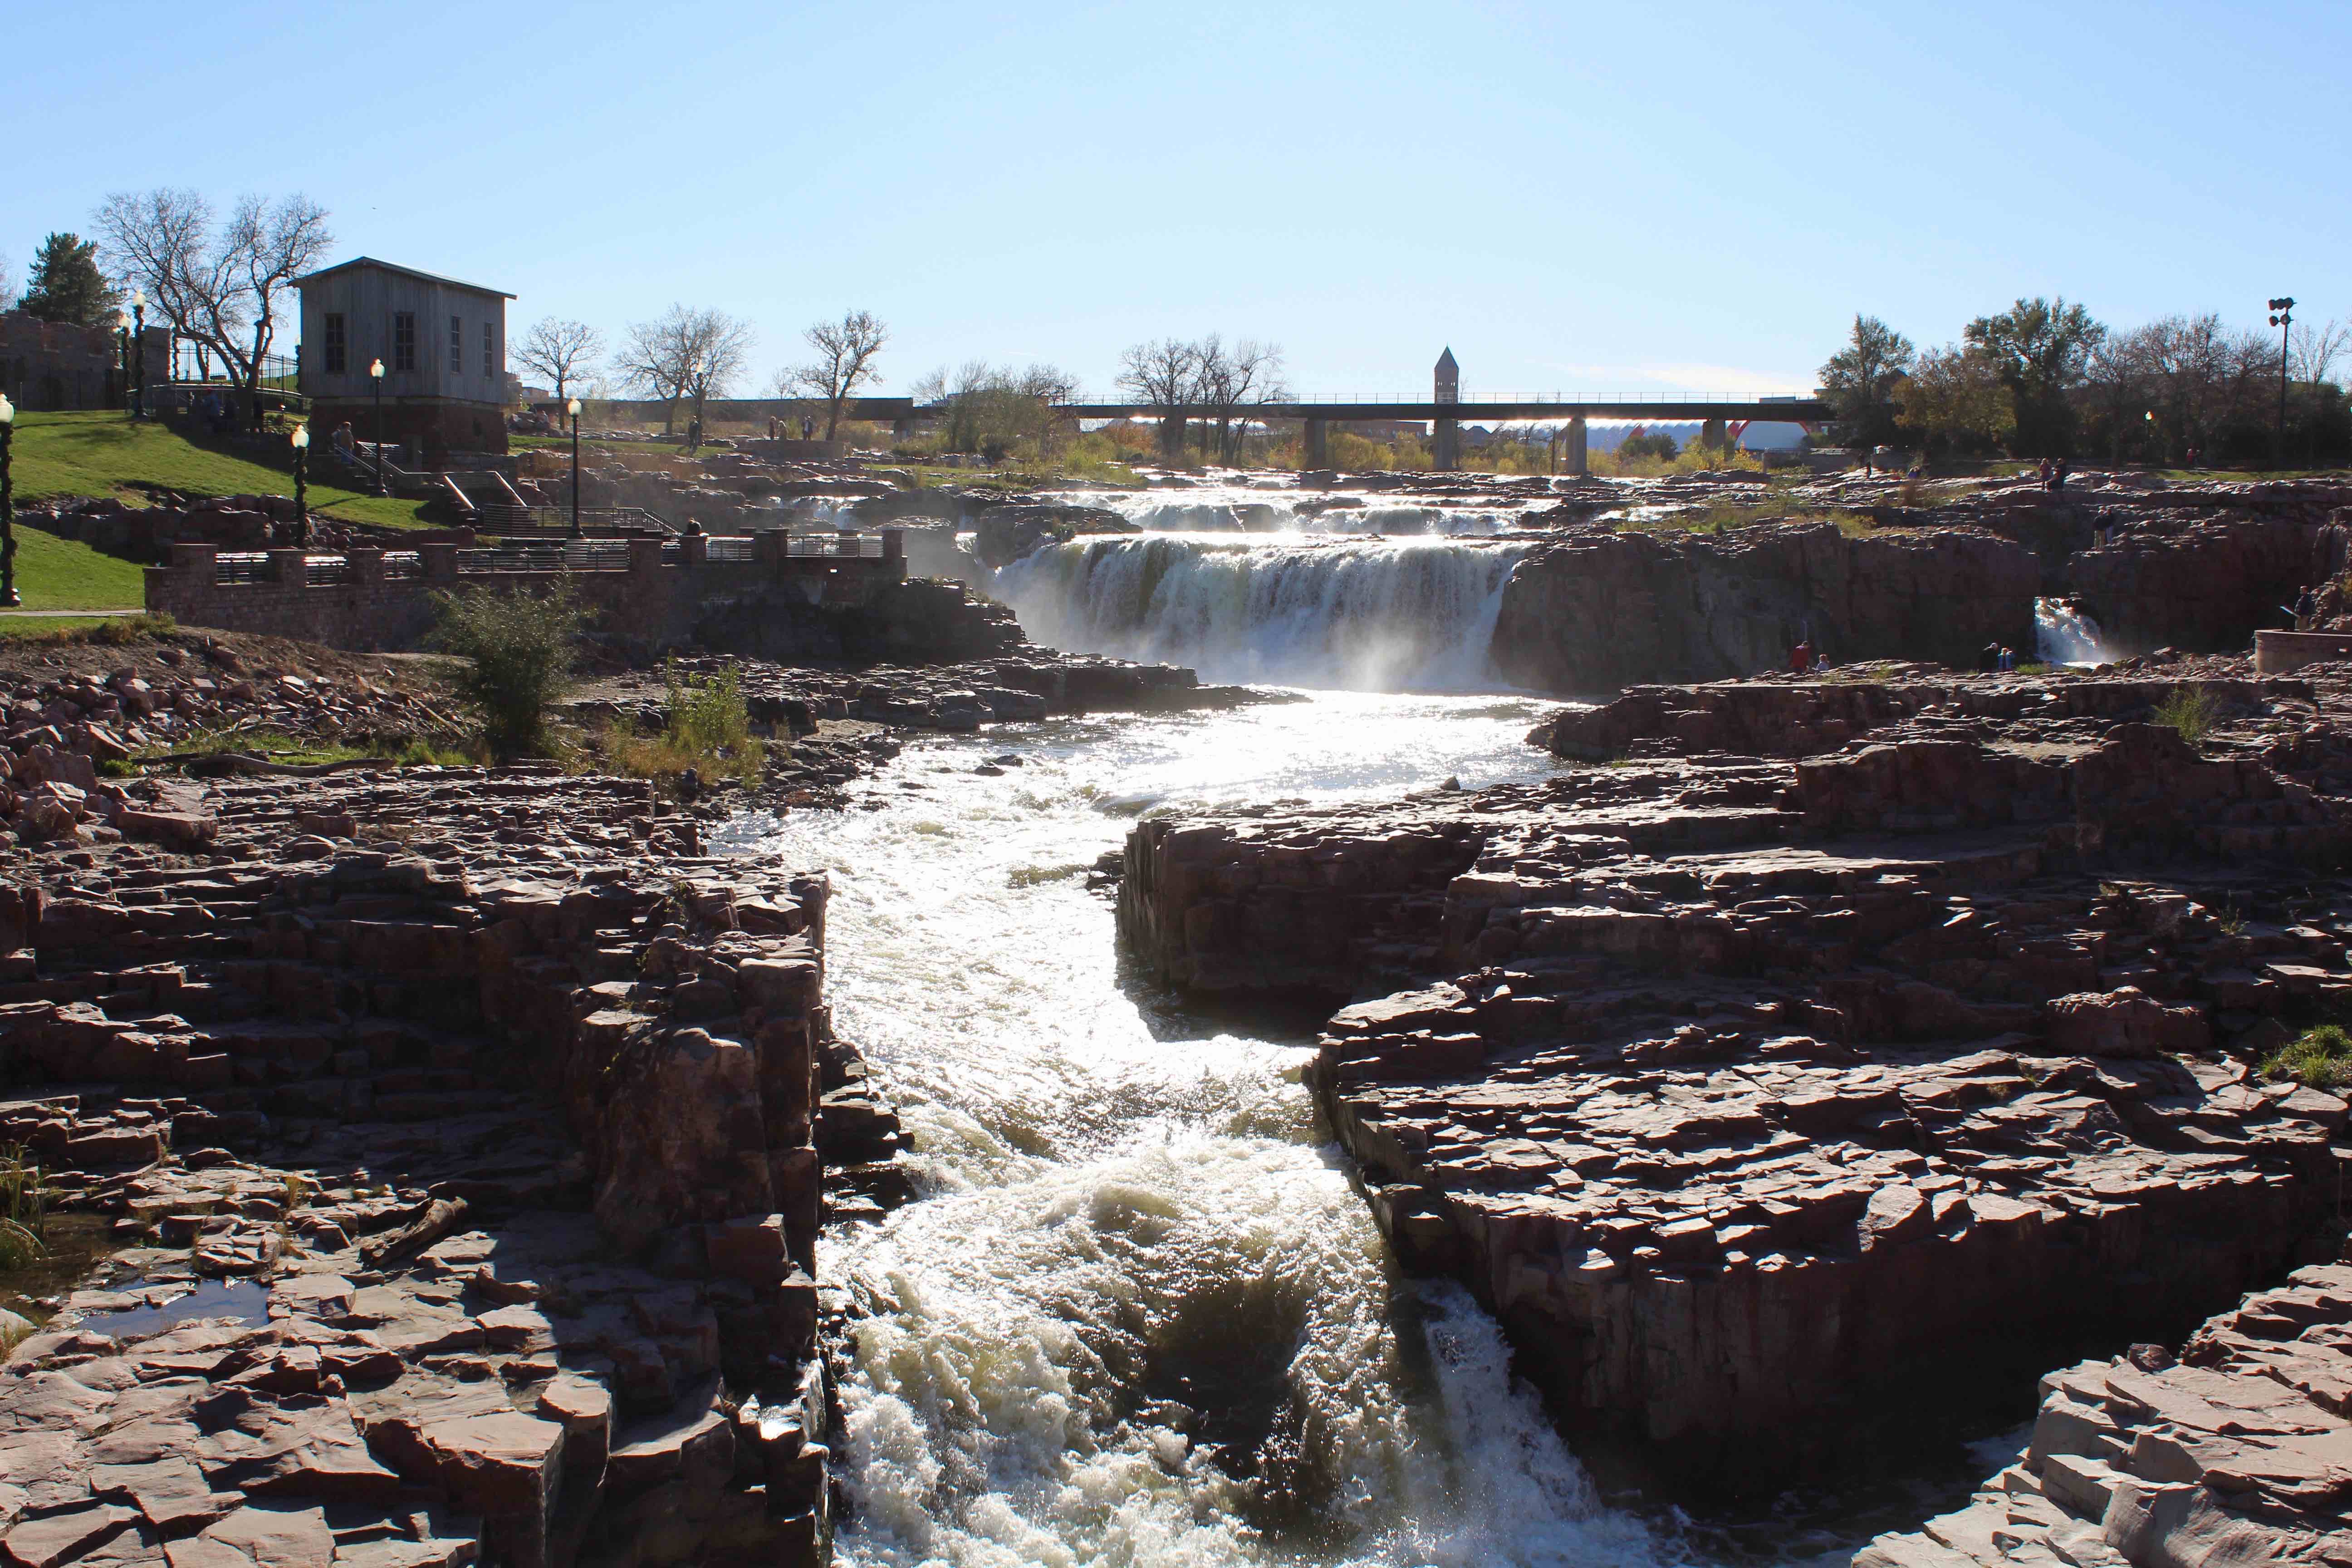 Visit Sioux Falls South Dakota The Top 10 Things To Do